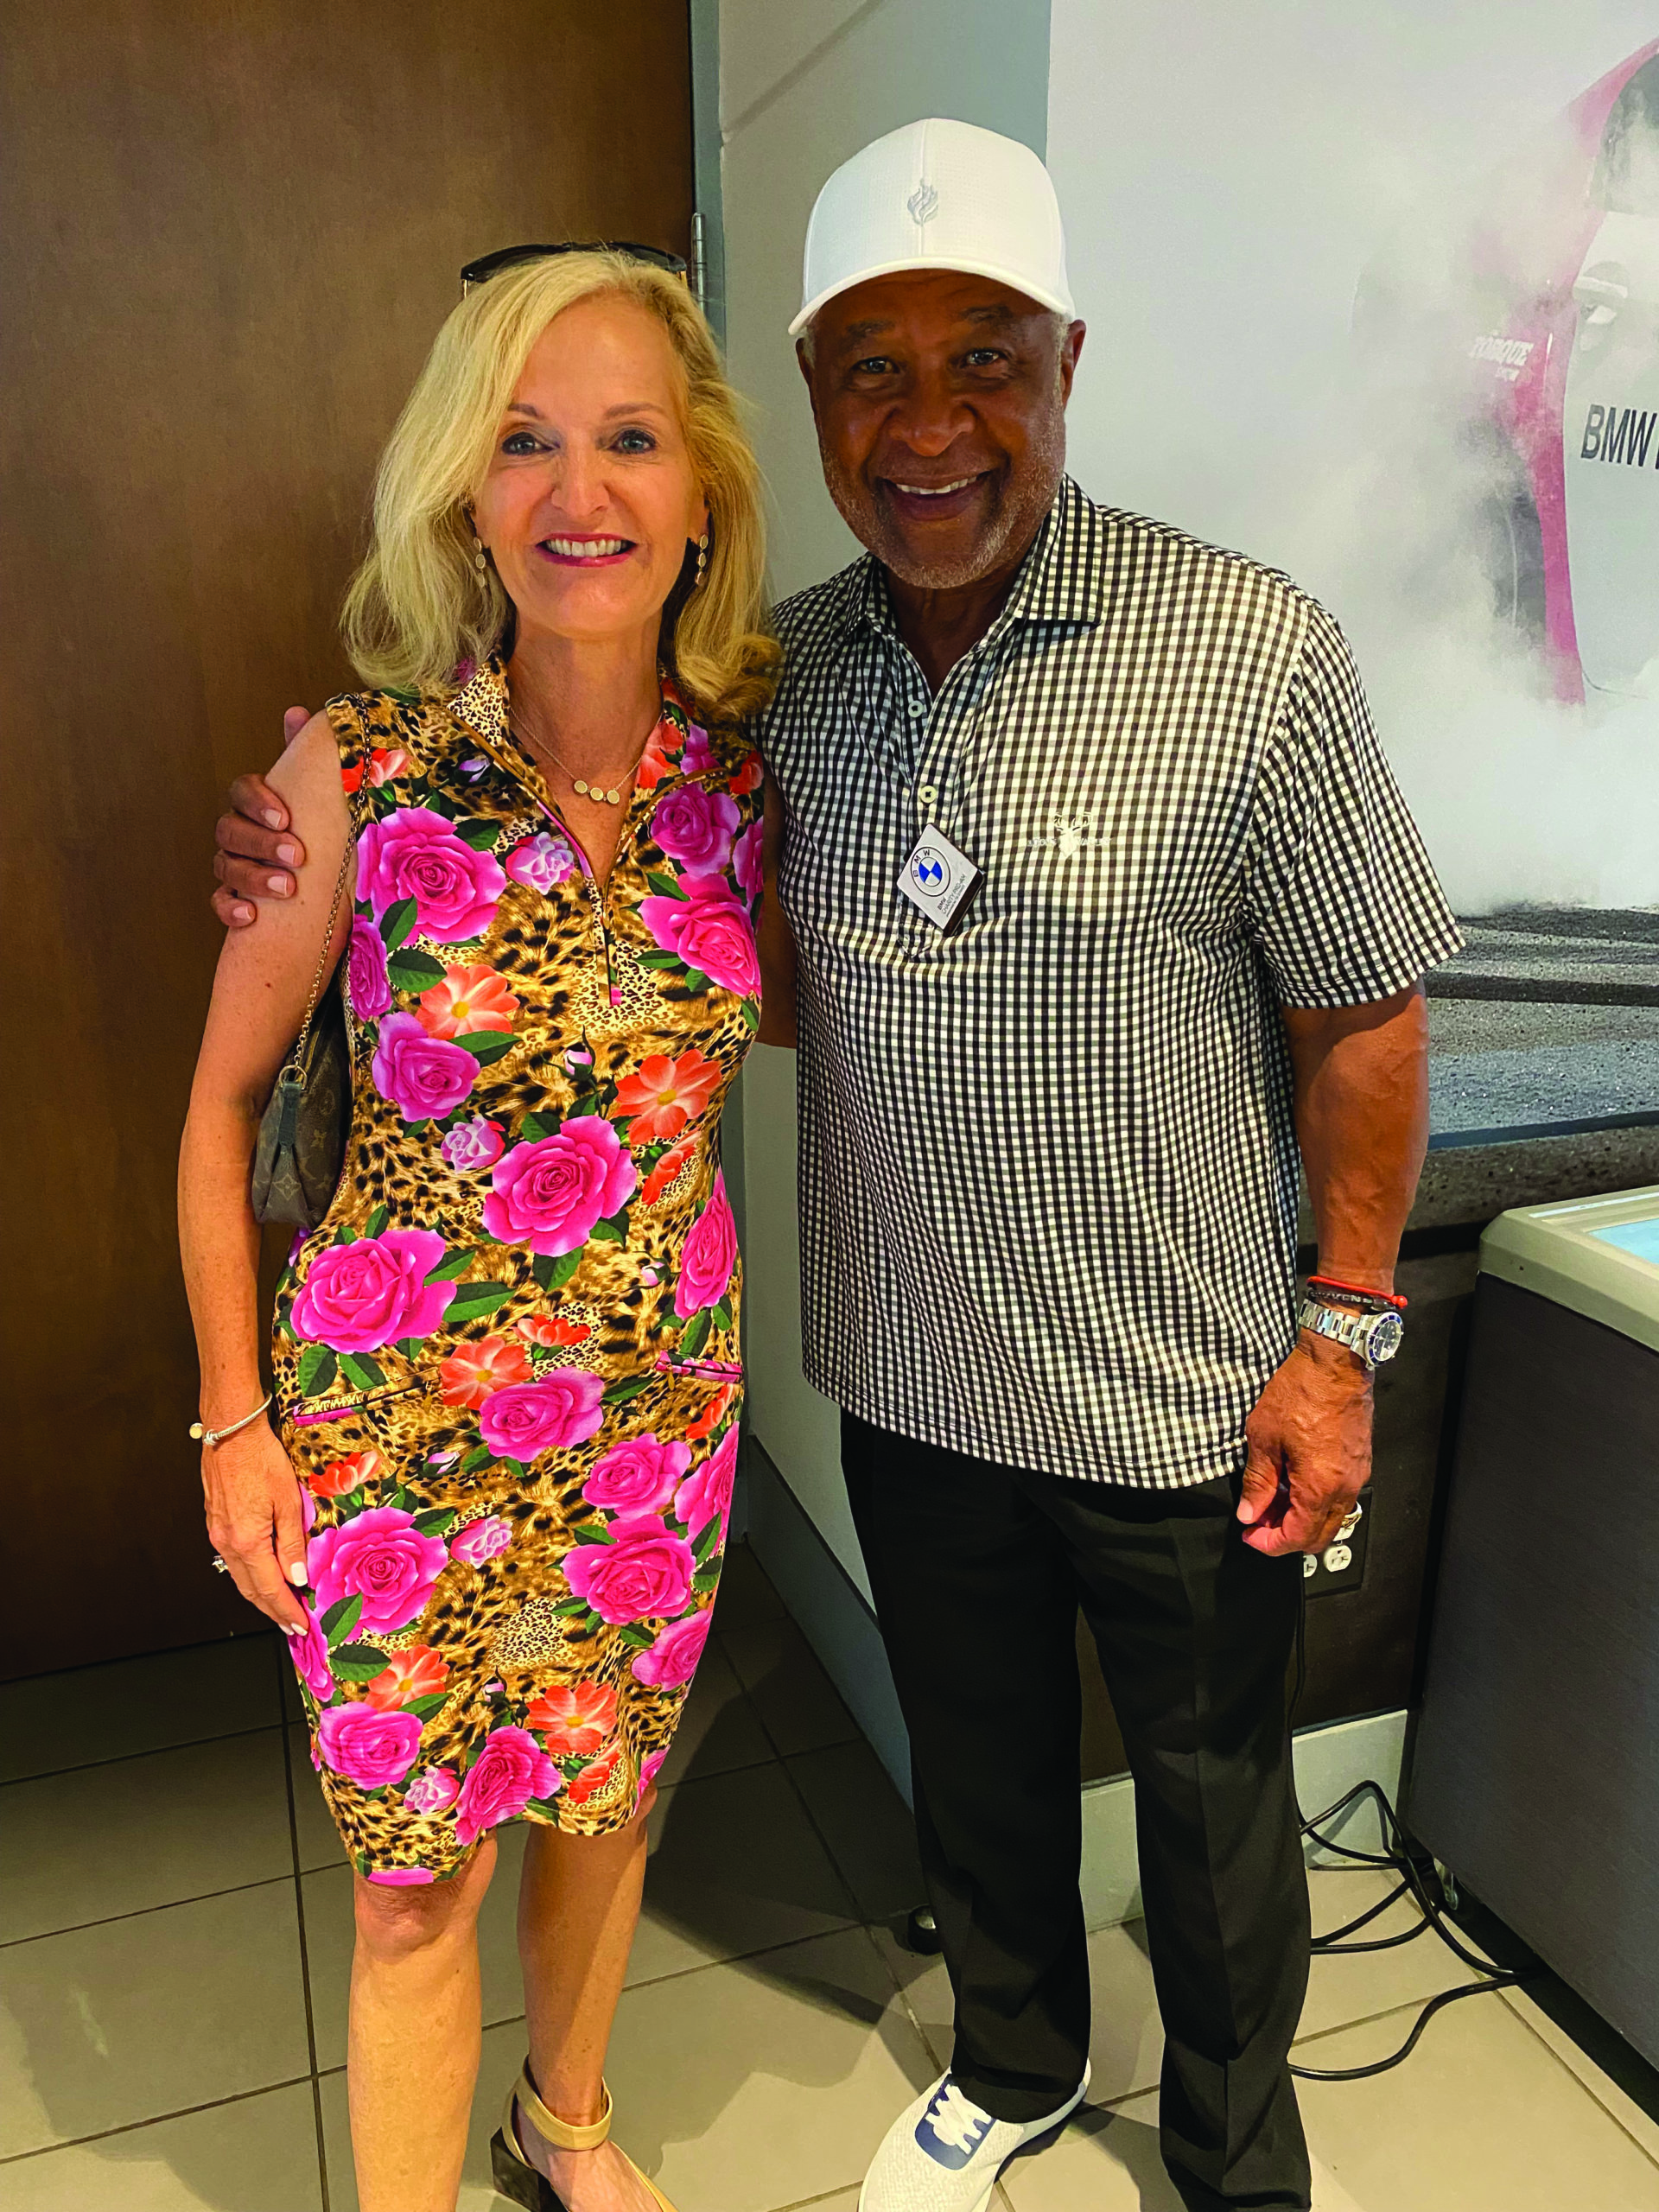 Ann Liguori and fellow celebrity golfer MLB Hall of Famer Ozzie Smith at the BMW Charity Pro-Am